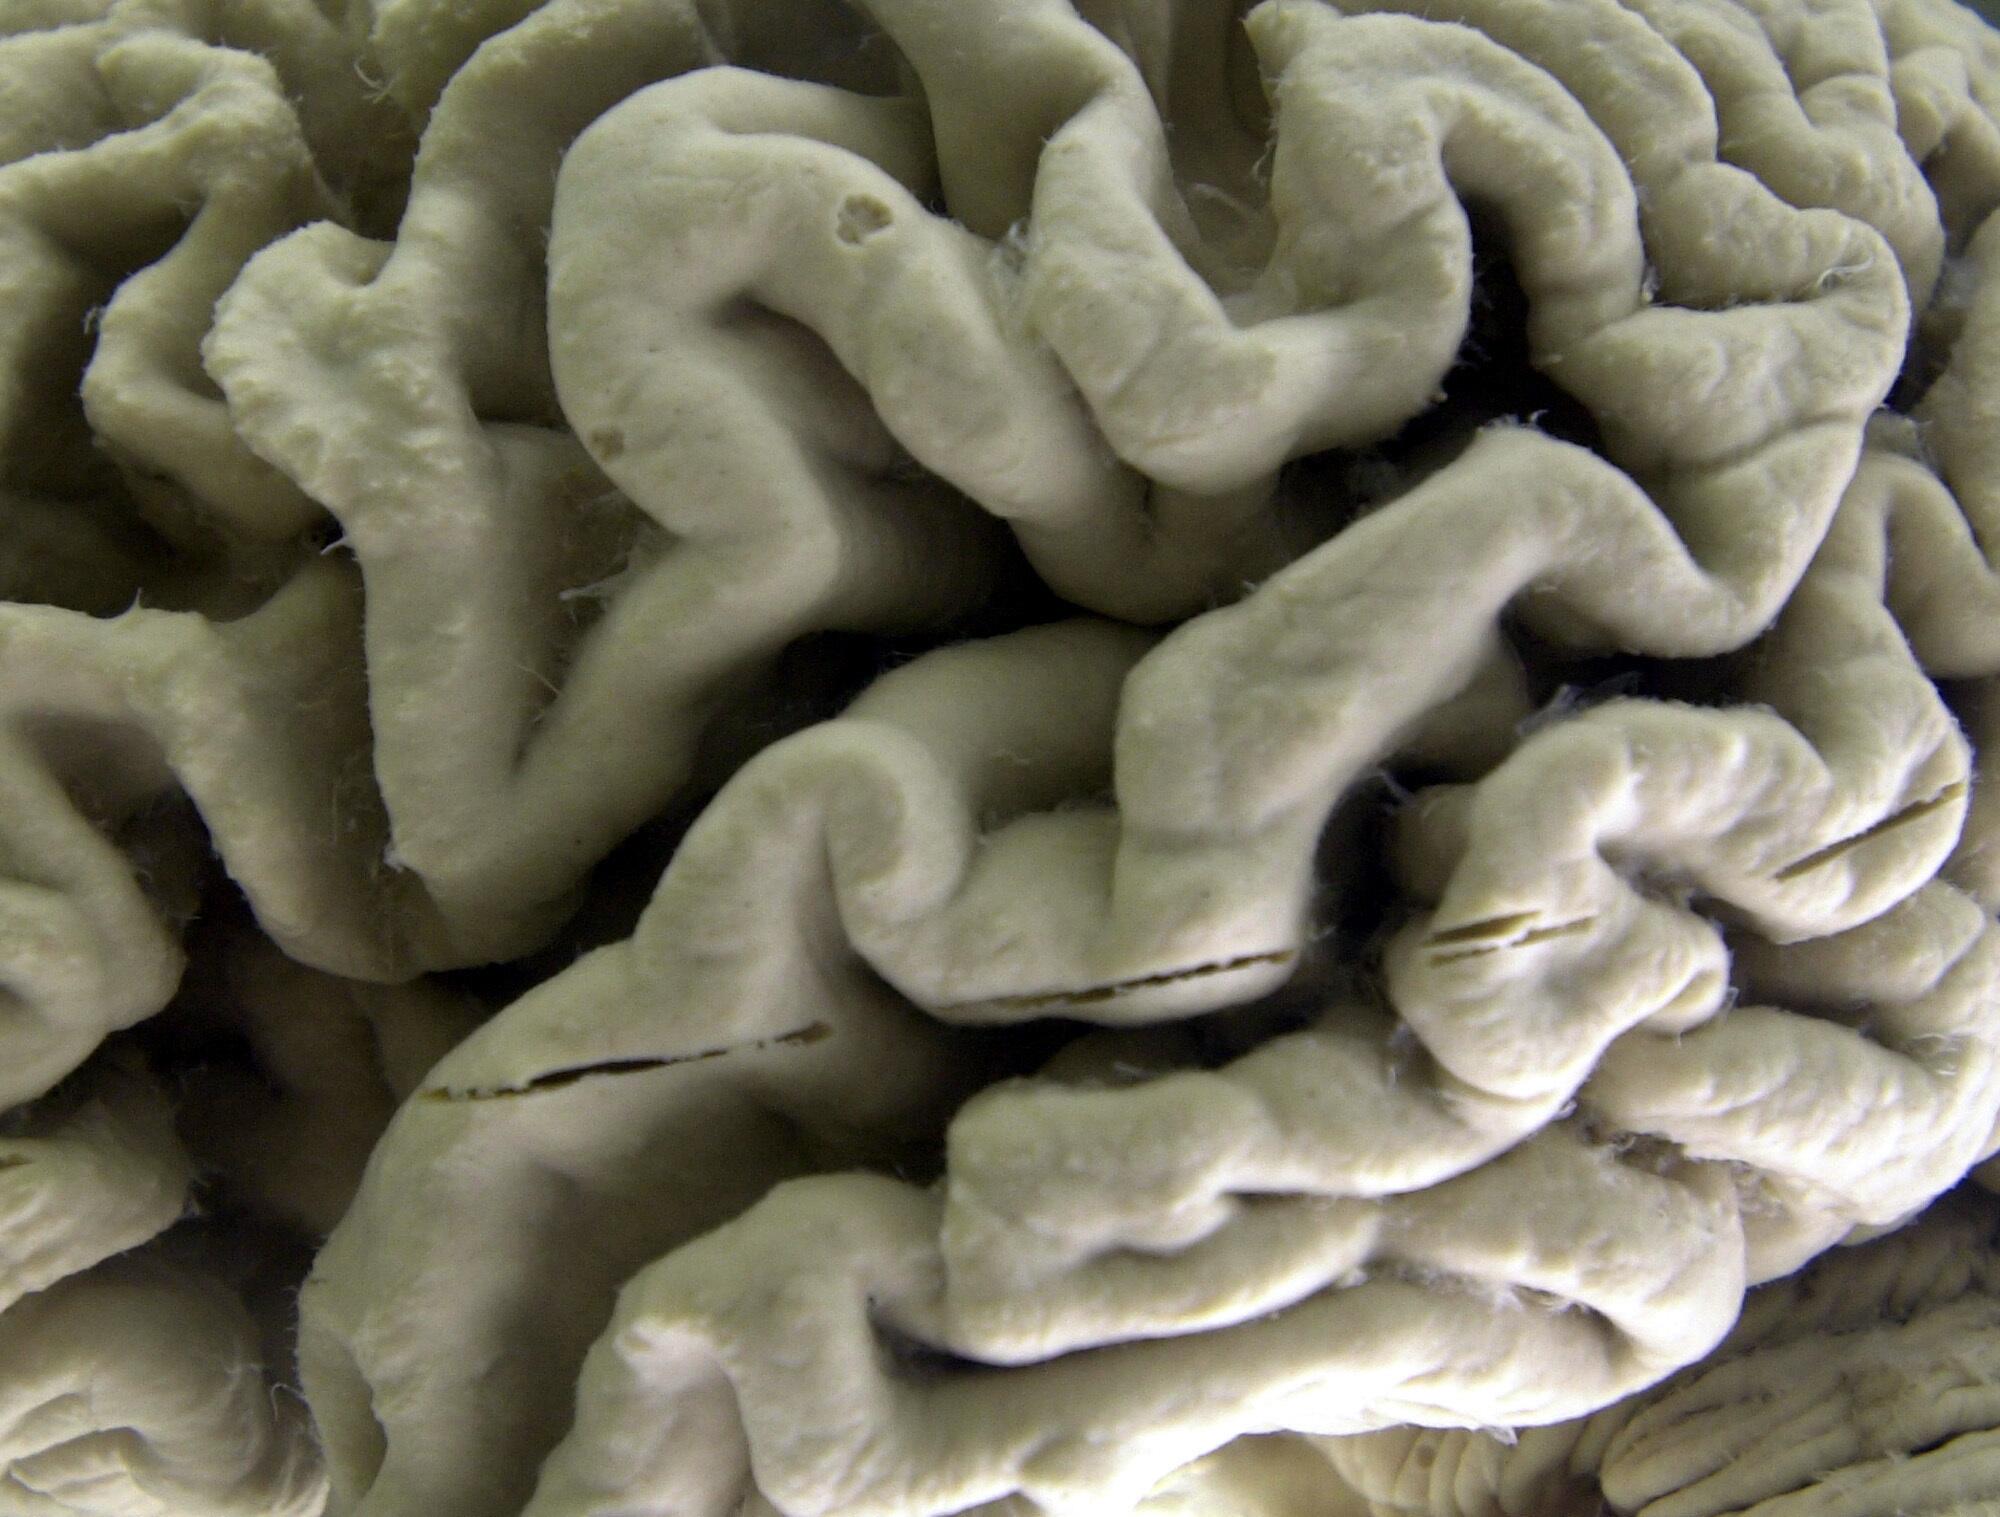 A closeup of a human brain affected by Alzheimer's disease is on display at the Museum of Neuroanatomy in Buffalo, N.Y.